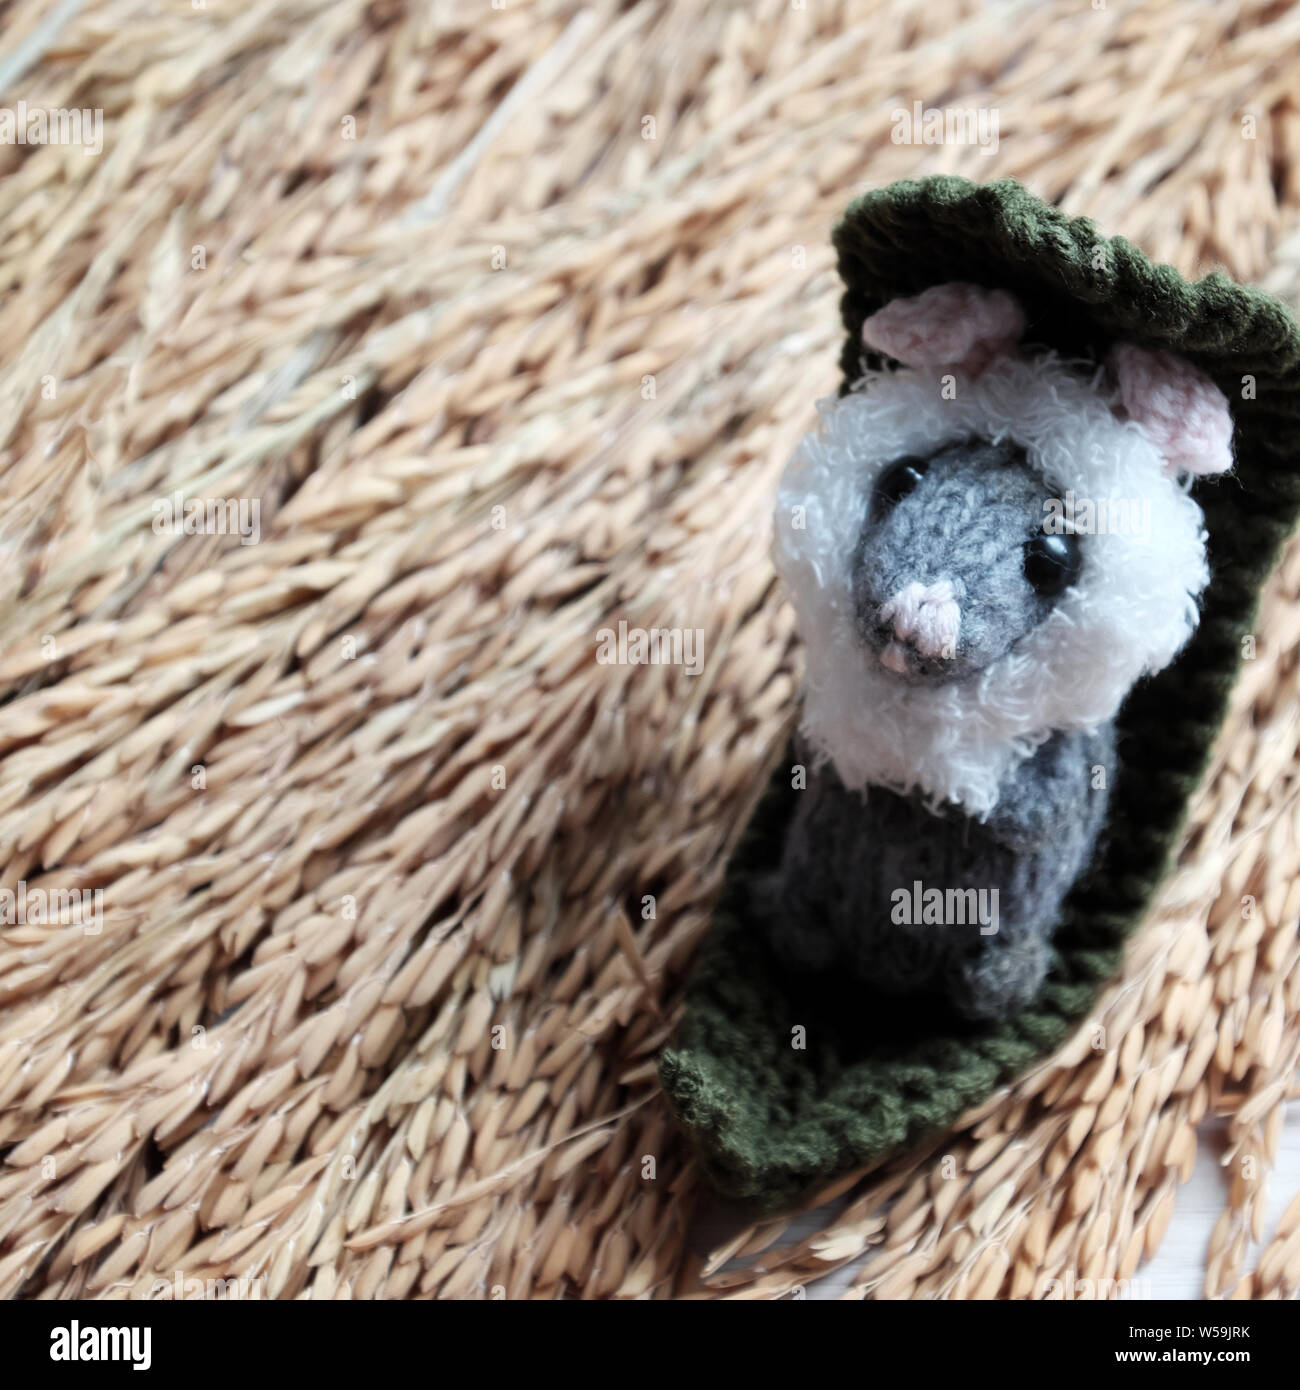 Cute mouse lay down to relax on sheaf of paddy background, handmade product woolen small rat knit from yarn in free time Stock Photo